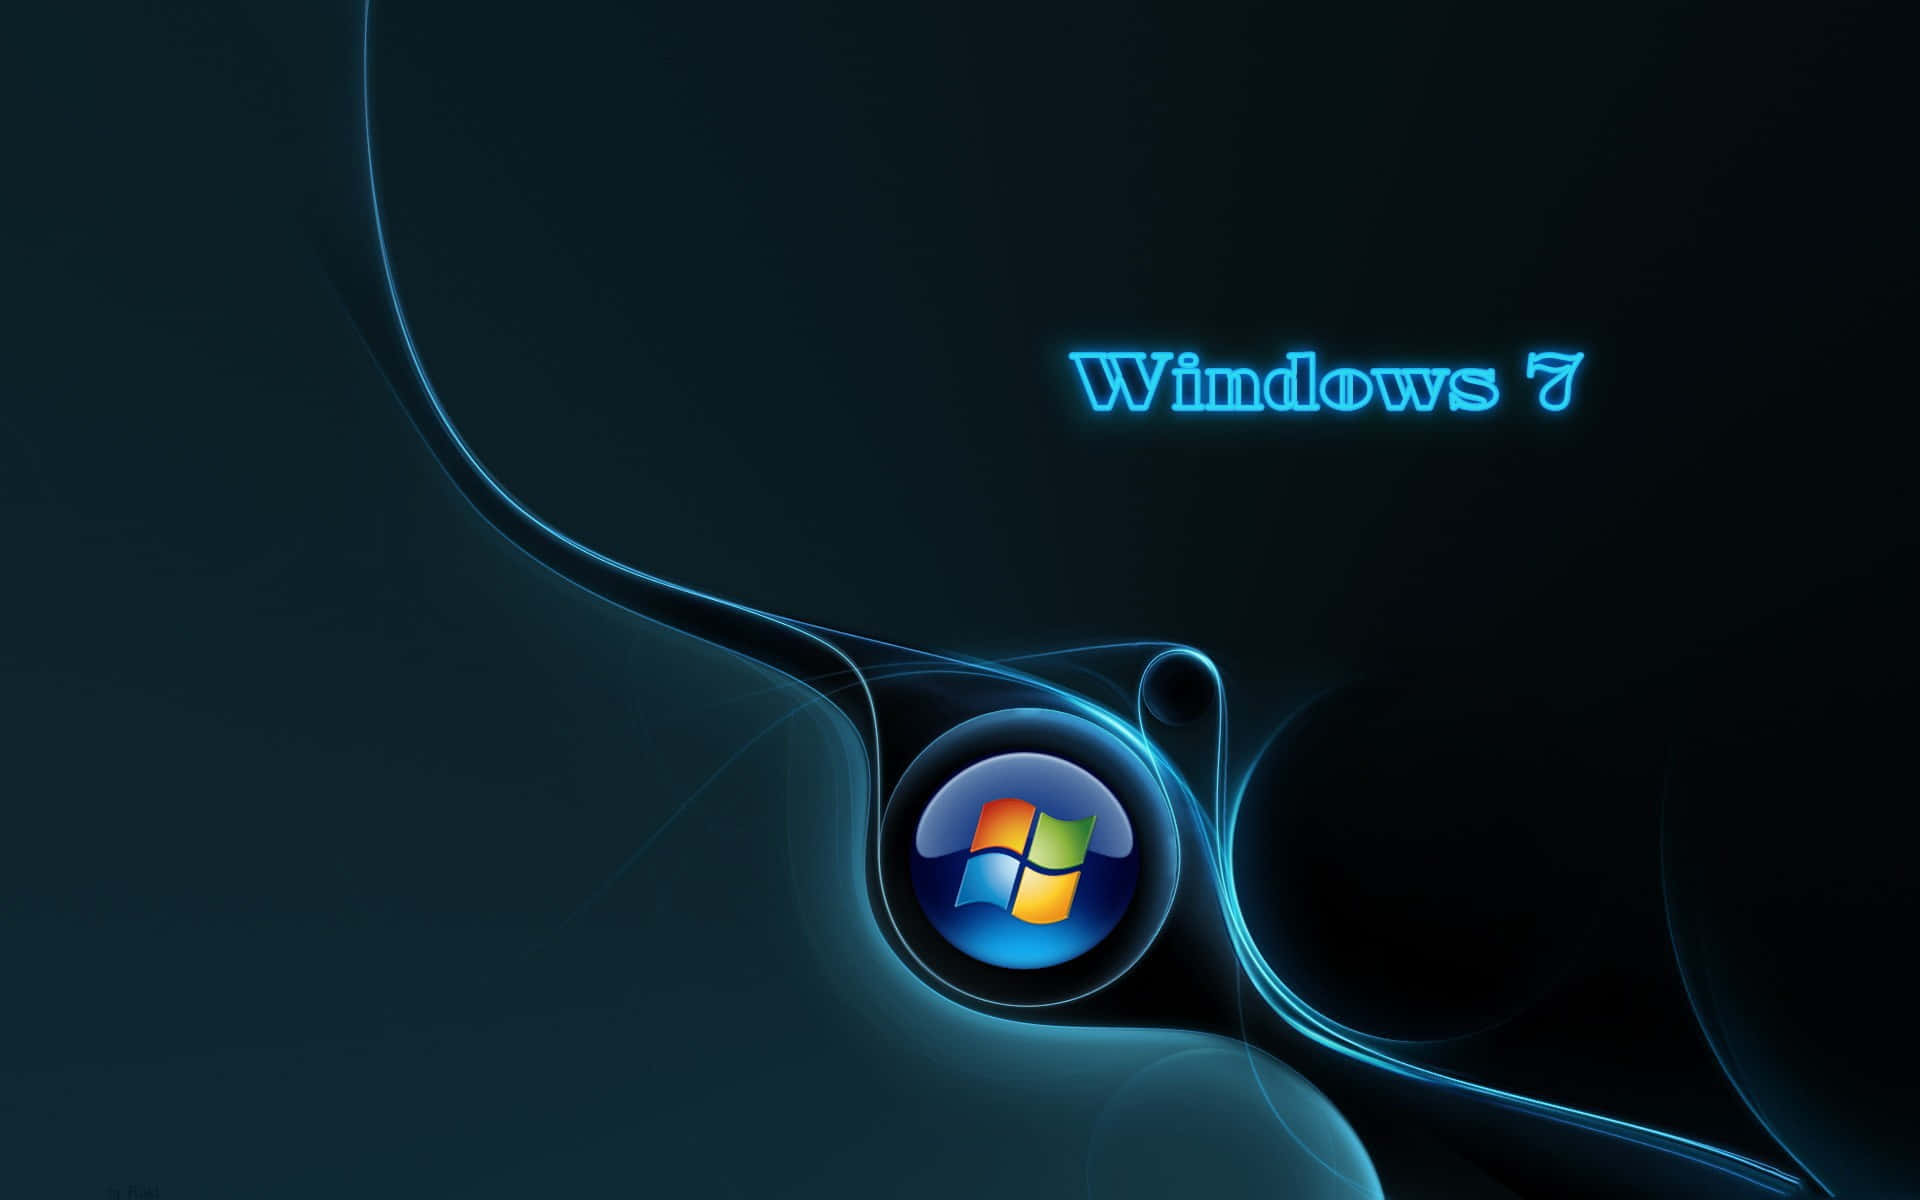 Windows 7 – A powerful operating system that gives you the perfect balance between work and play.